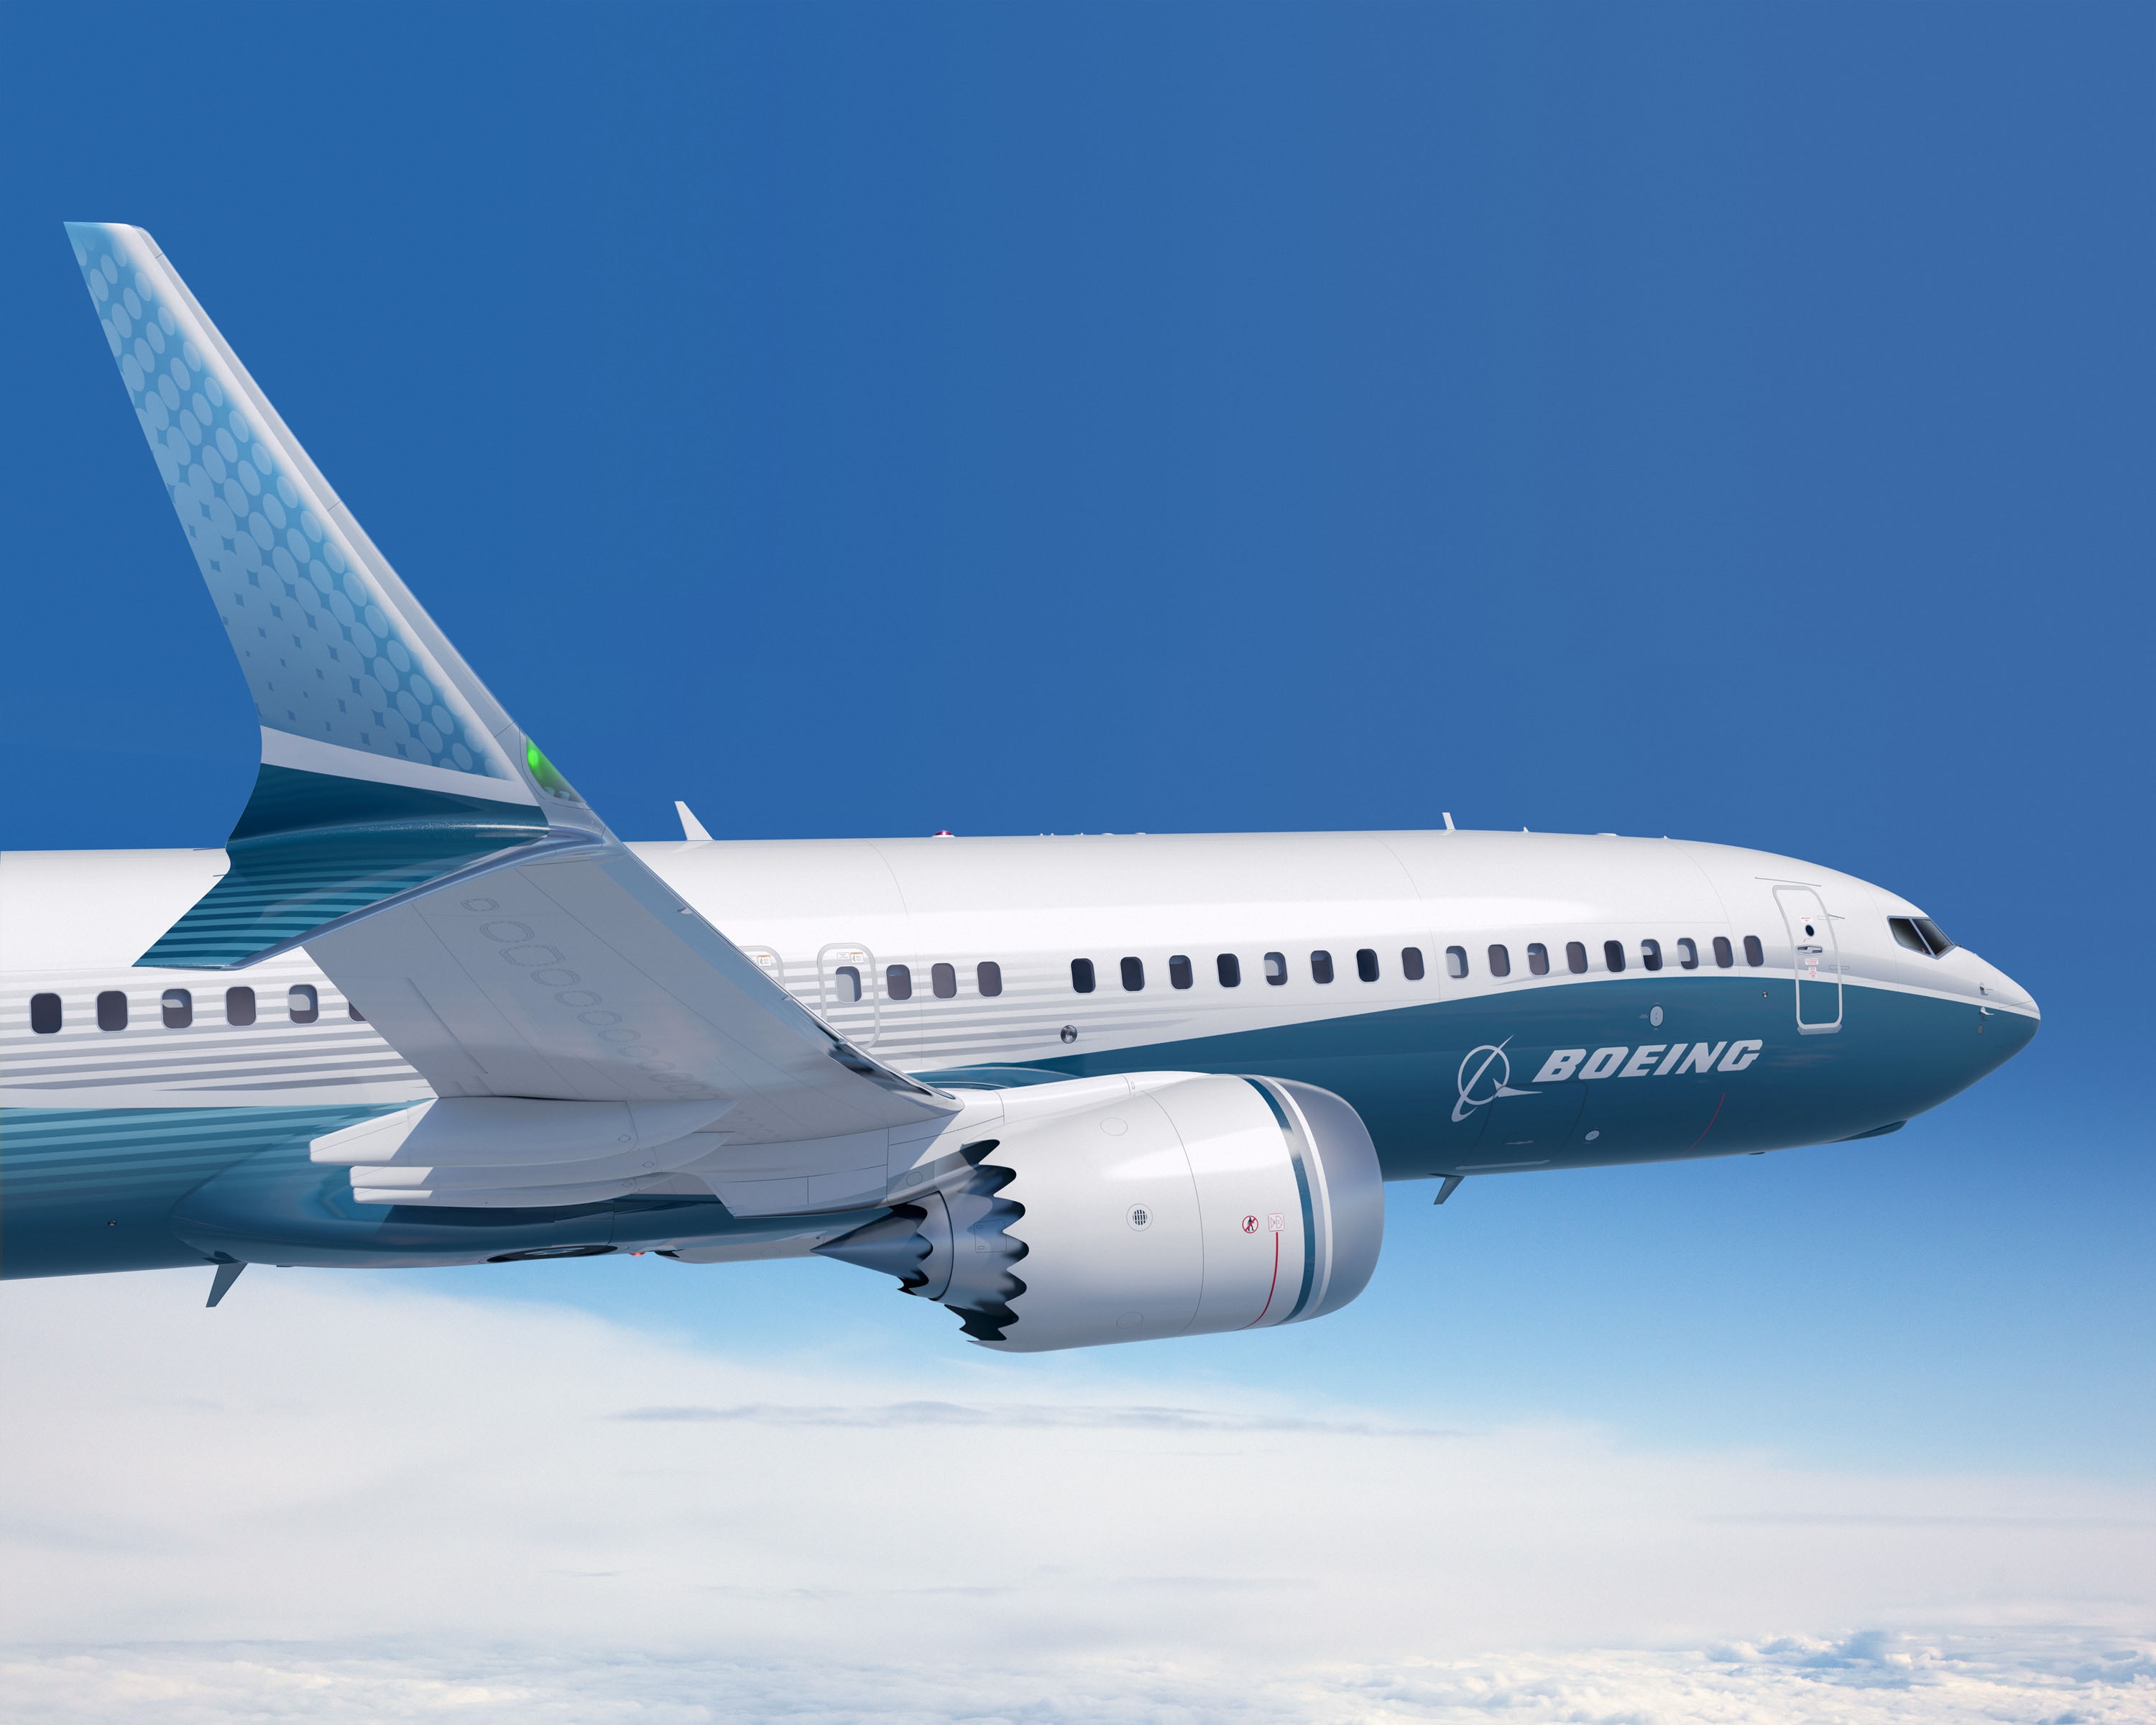 boeing 737 max vs airbus a320neo